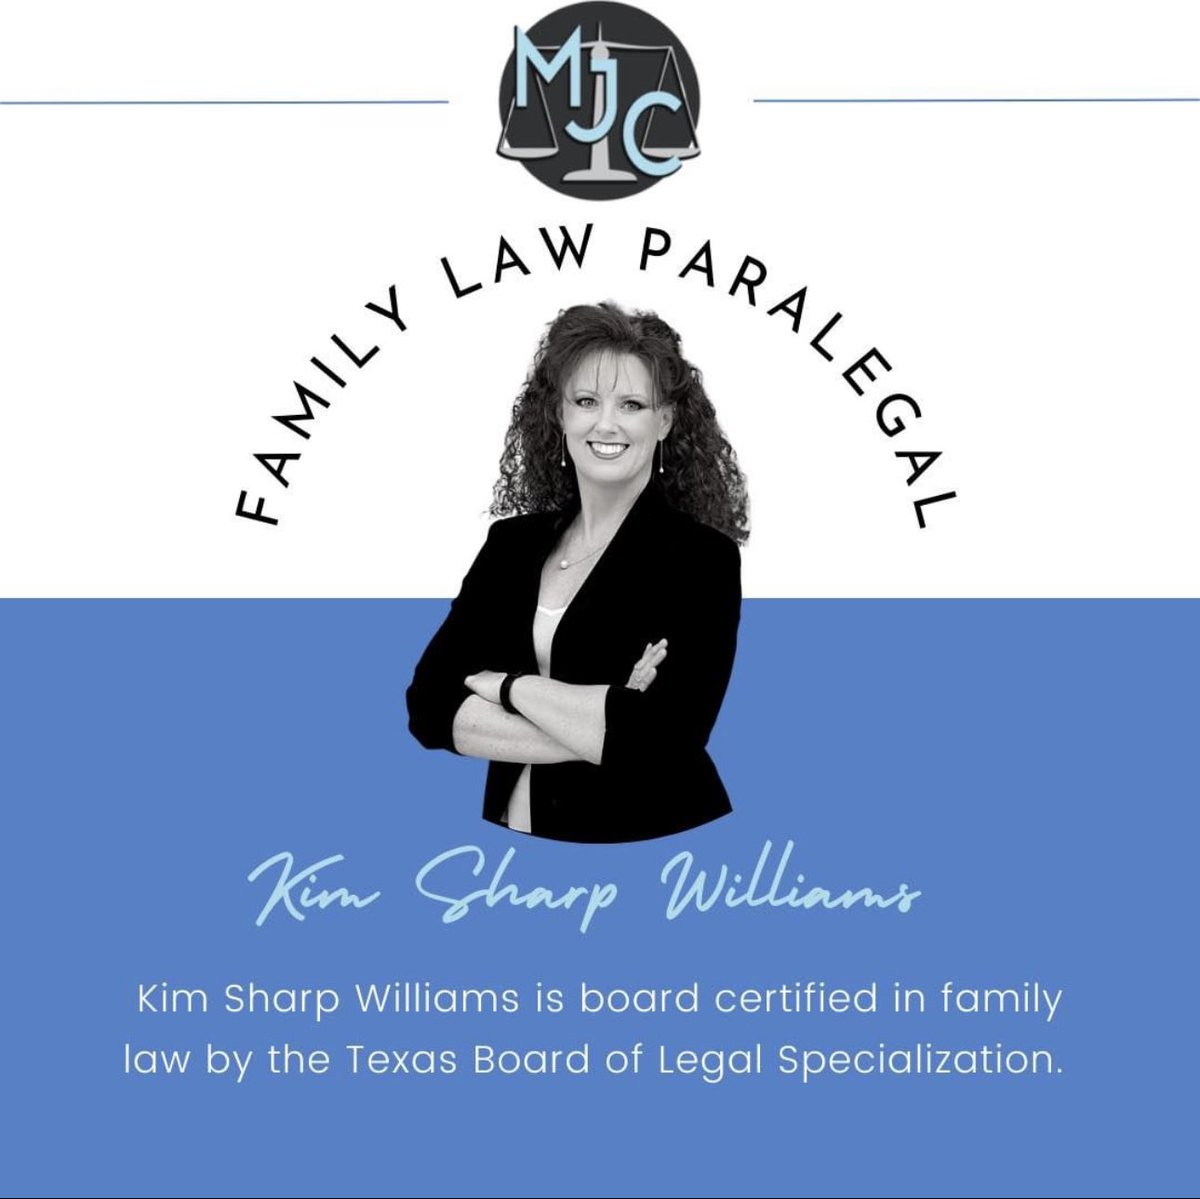 🏅We’re PROUD to offer certified staff to our clients!

#family #familyfirst #familylaw #familylawyer #familylawattorney #familylawyers #familylawlawyer #familylawfirm #FamilyLawyerNearMe #familylawmediation #paralegal #paralegalservices #paralegallife #paralegals